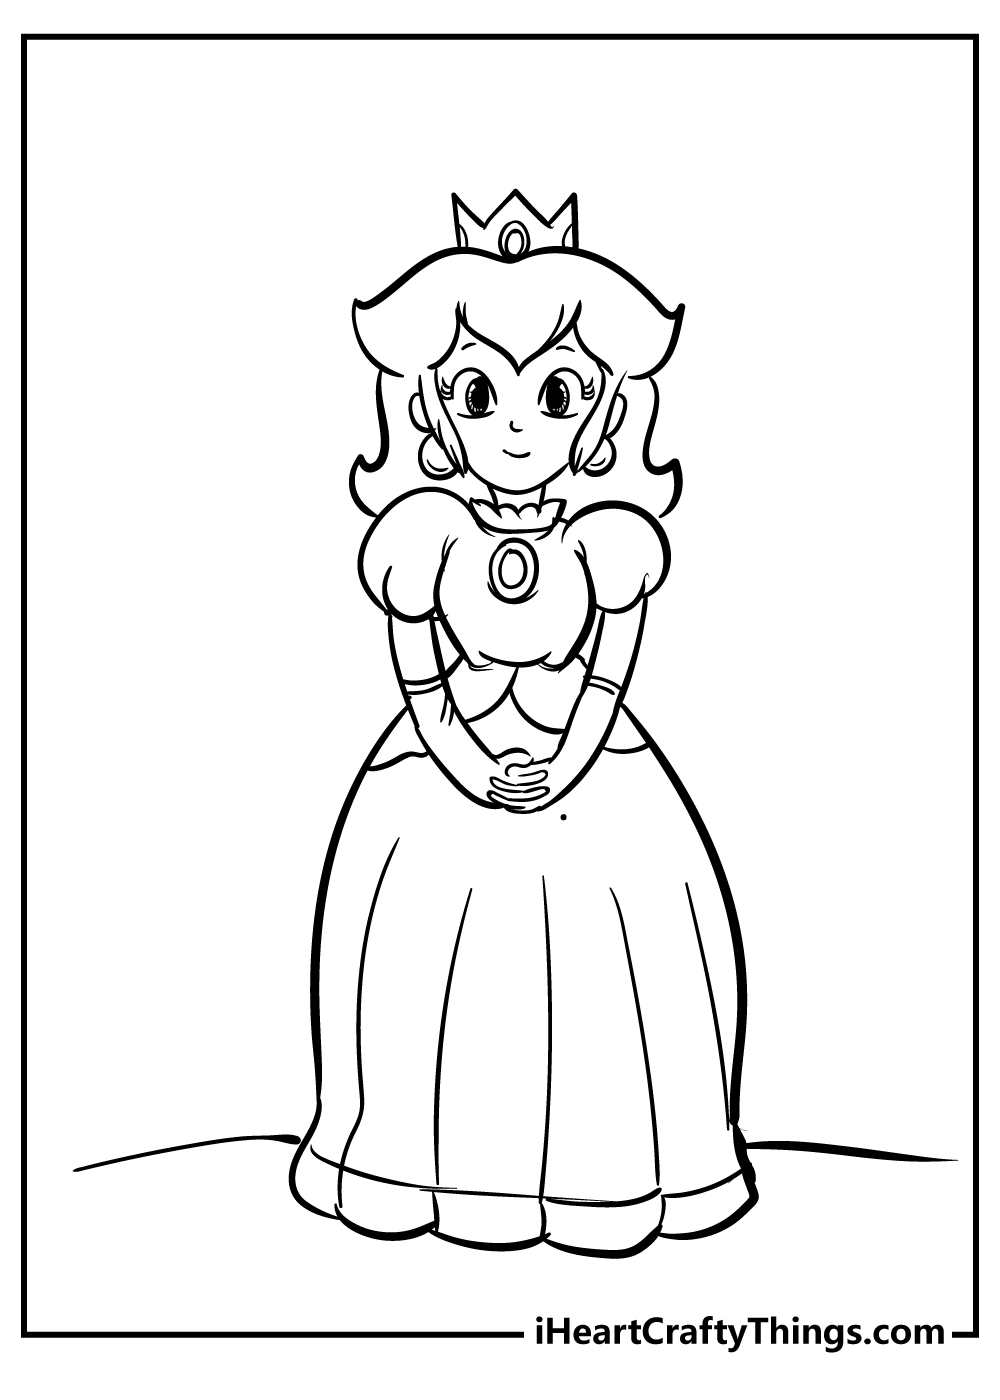 Princess Peach Coloring Pages for Kids 37